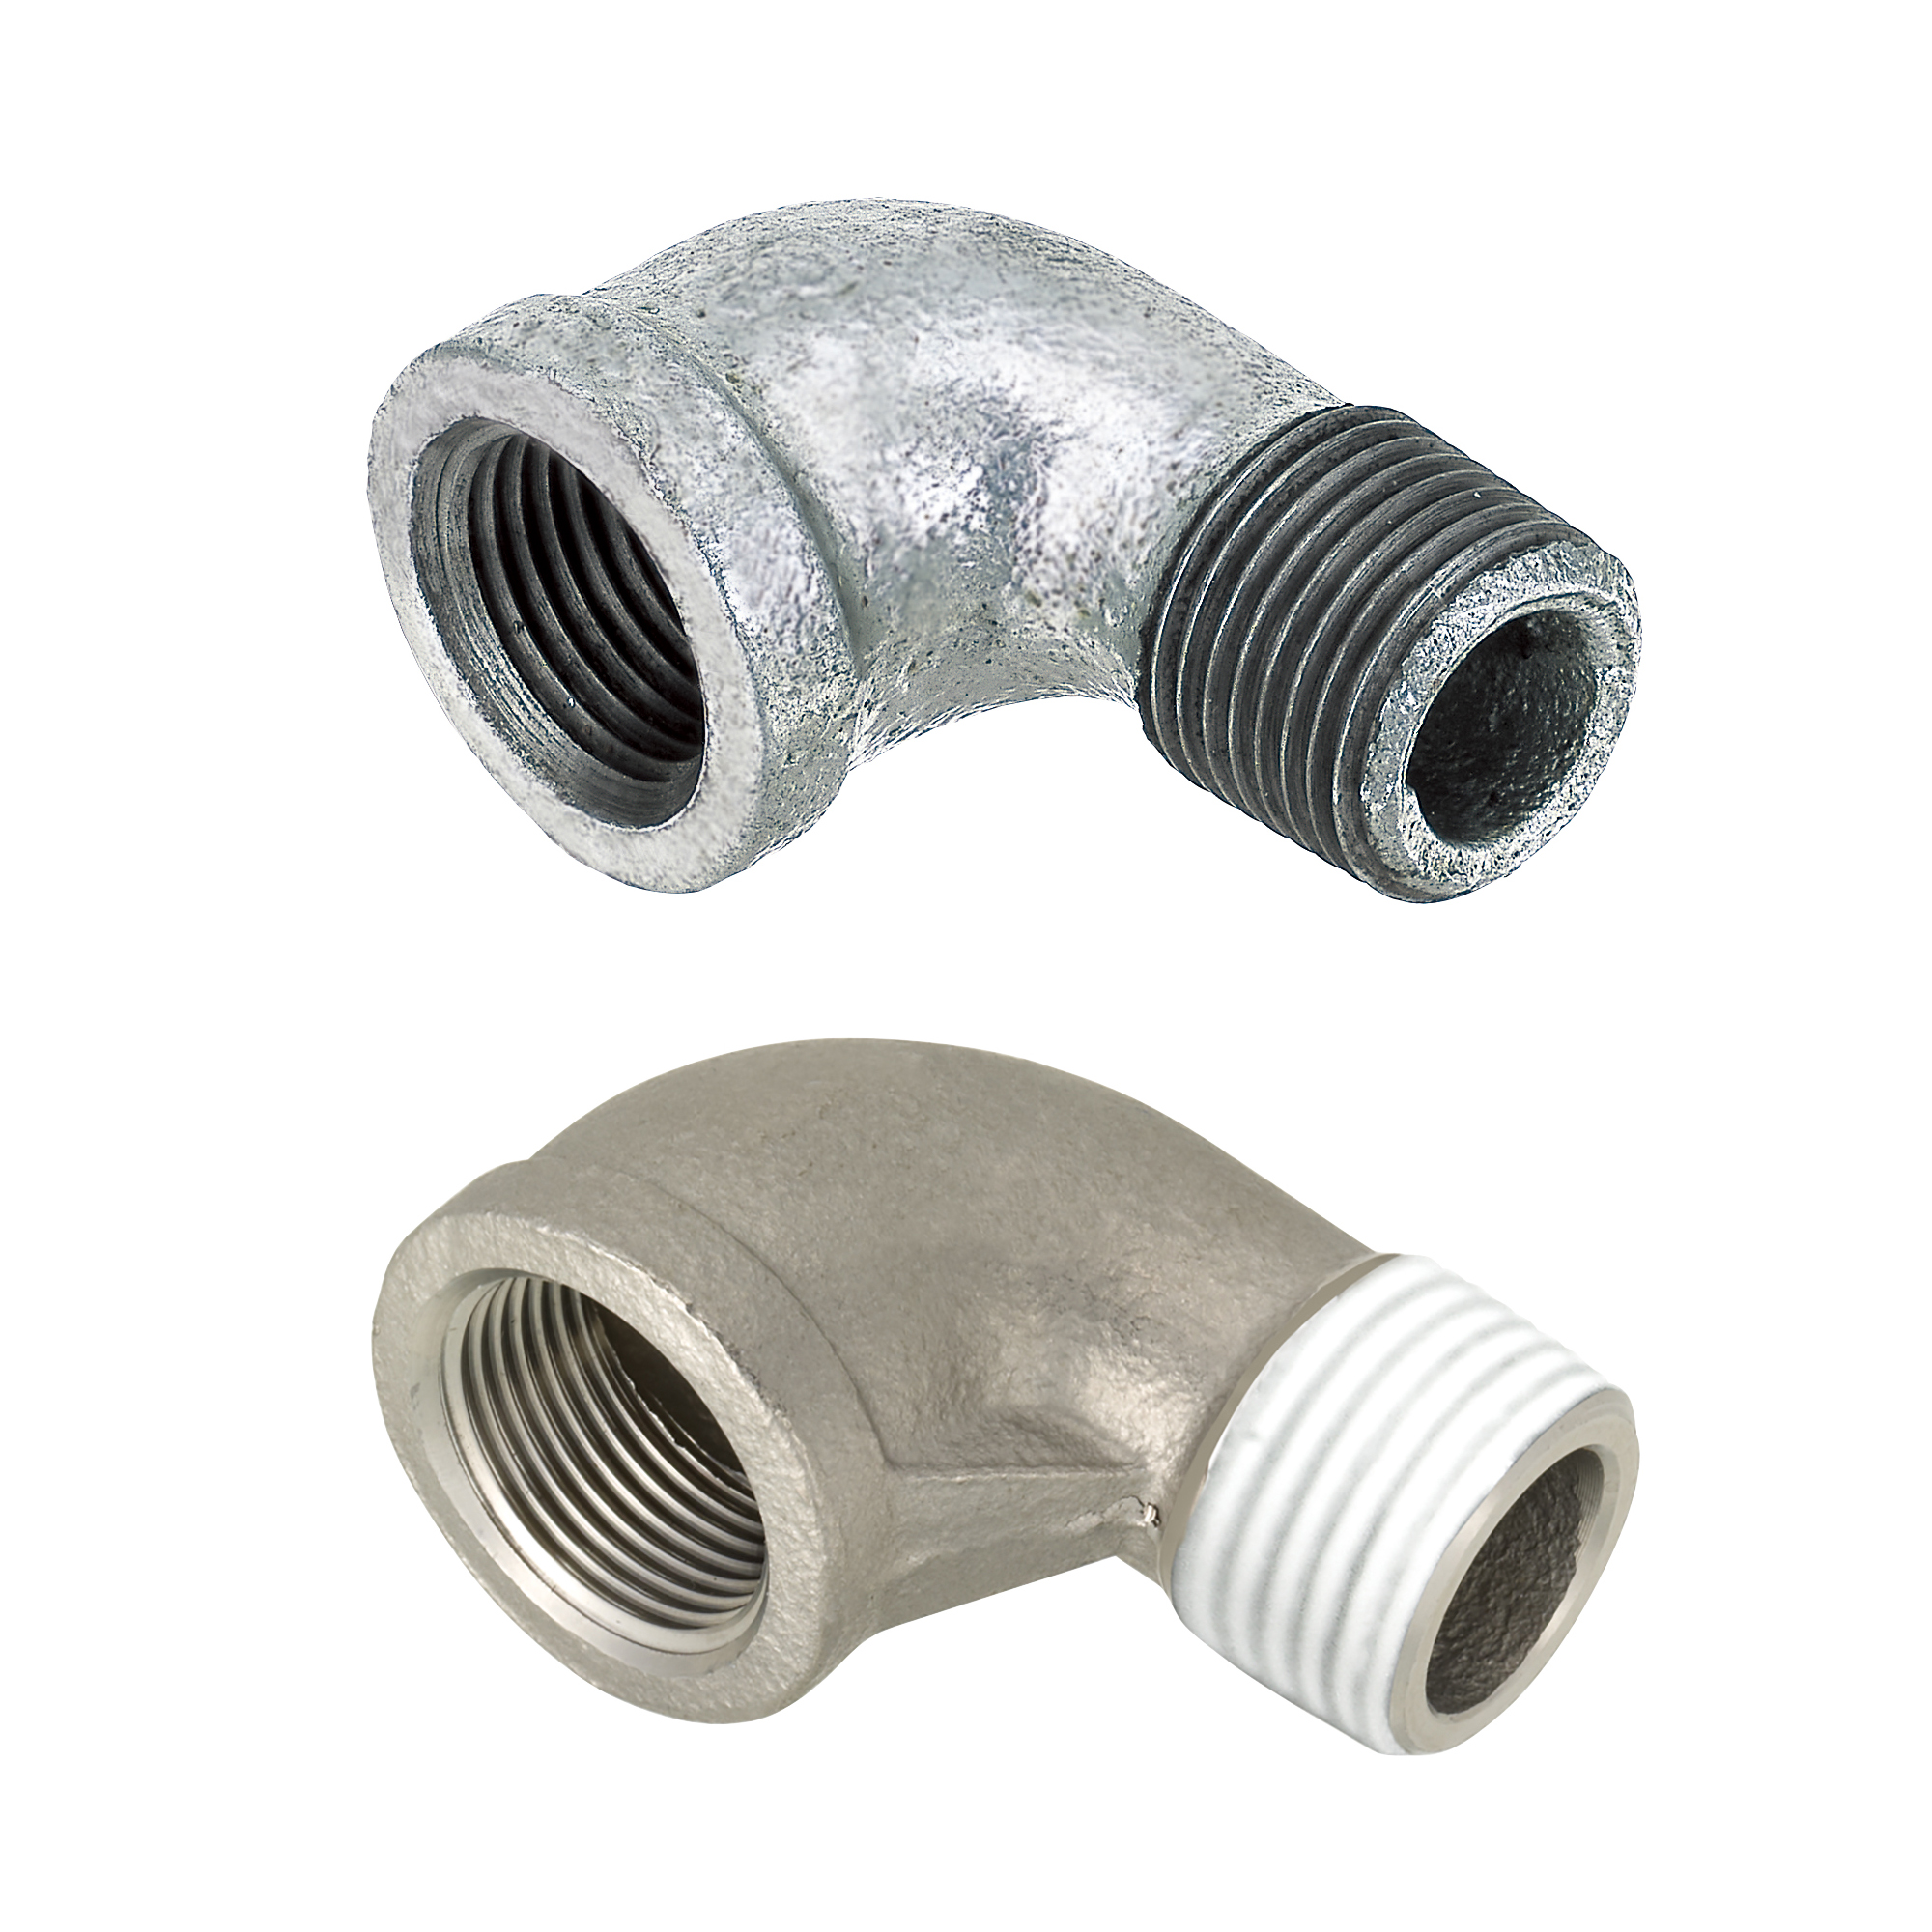 Low Pressure Fittings/90 Deg. Elbow/Threaded and Tapped (SGPPEL32A) 